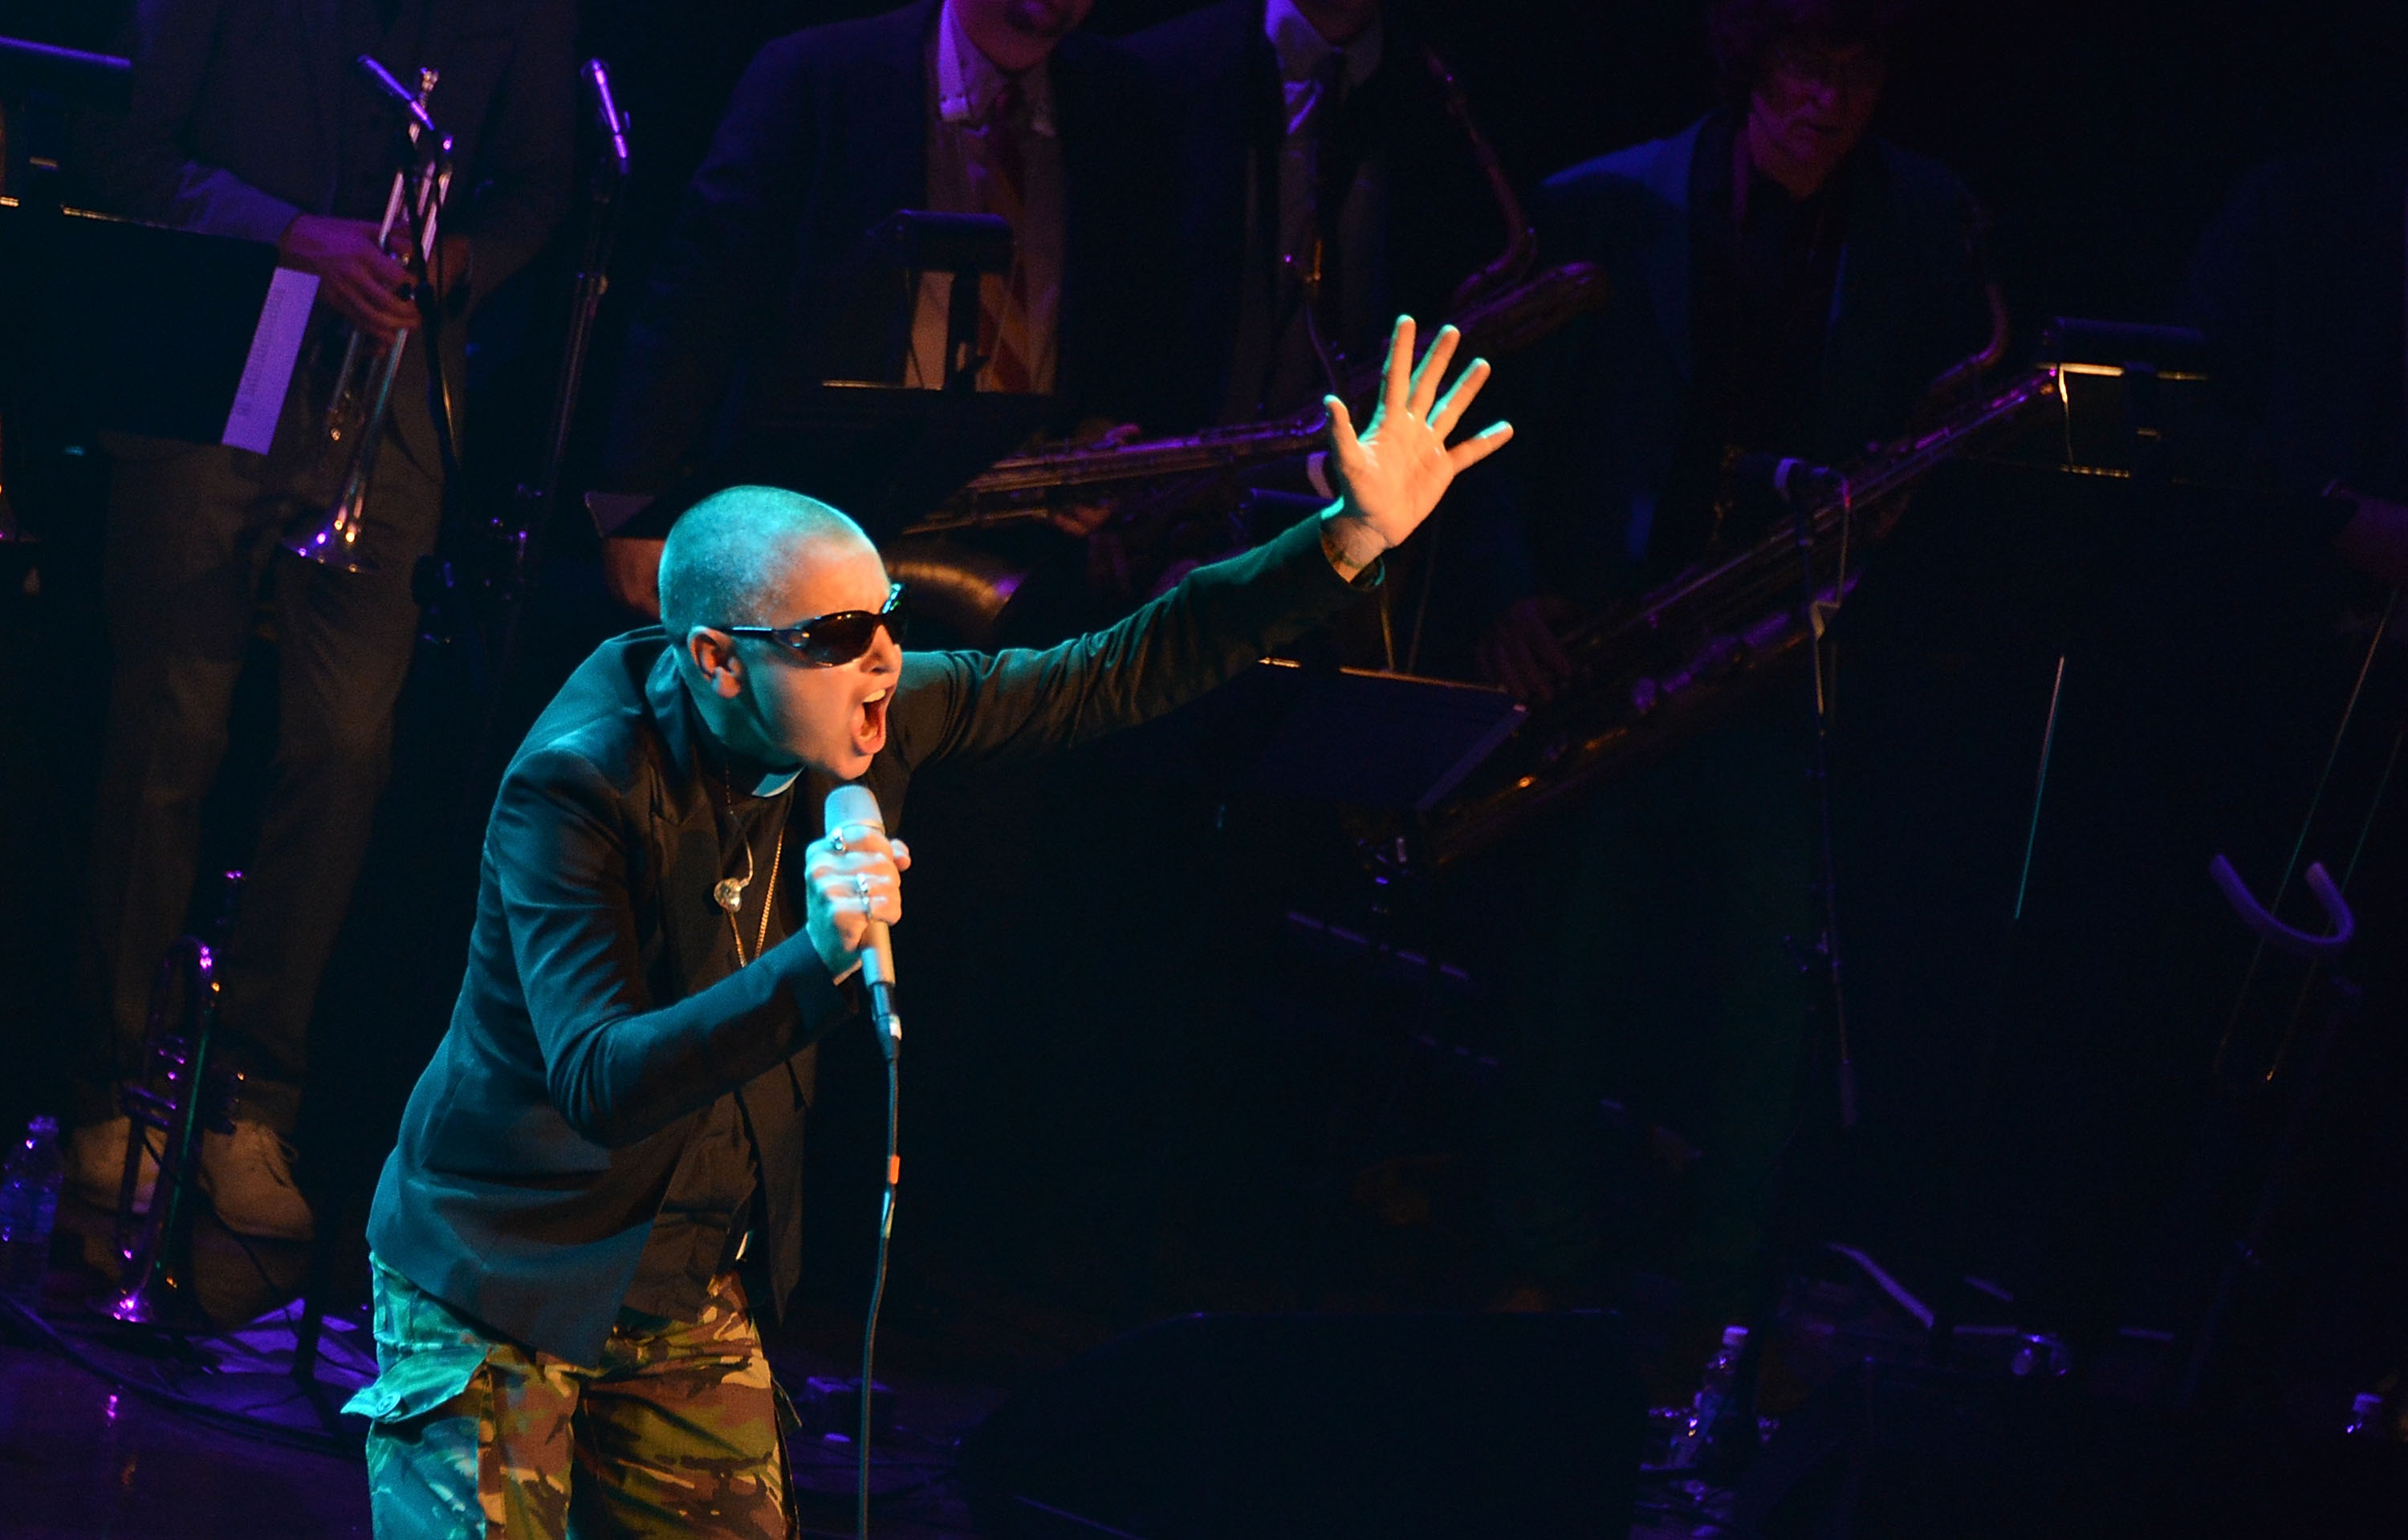 NEW YORK, NY - JULY 20: Singer Sinead O'Connor performs at "Here But I'm Gone: A 70th Birthday Tribute to Curtis Mayfield" concert at Avery Fisher Hall, Lincoln Center on July 20, 2012 in New York City. (Photo by Mike Coppola/Getty Images)